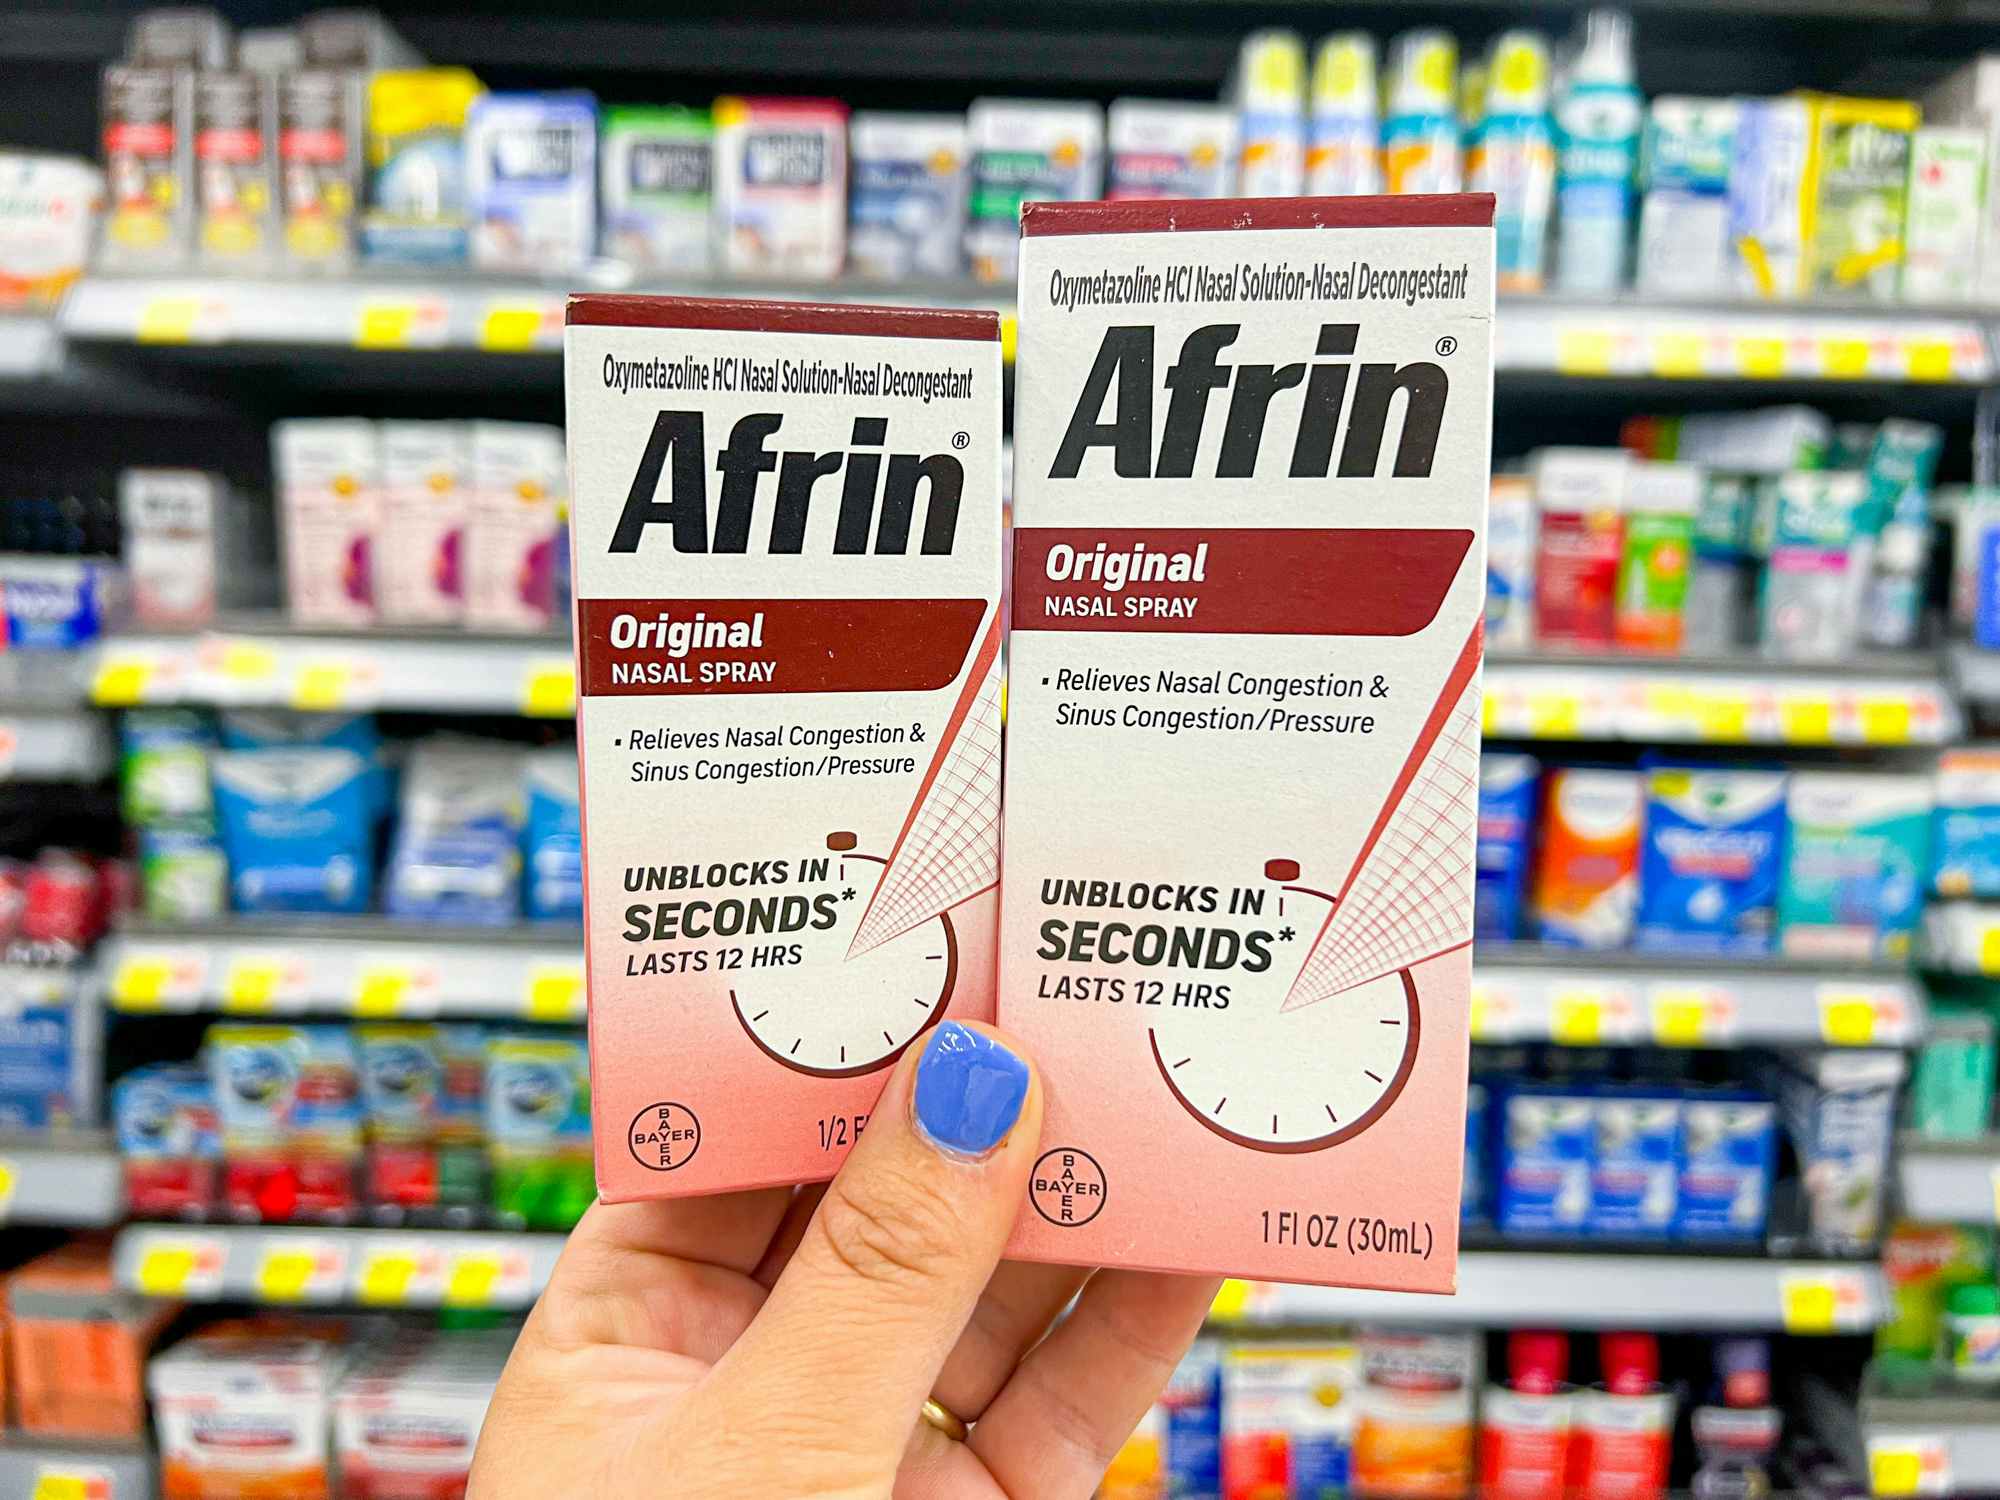 Someone holding up boxes of Afrin in a store